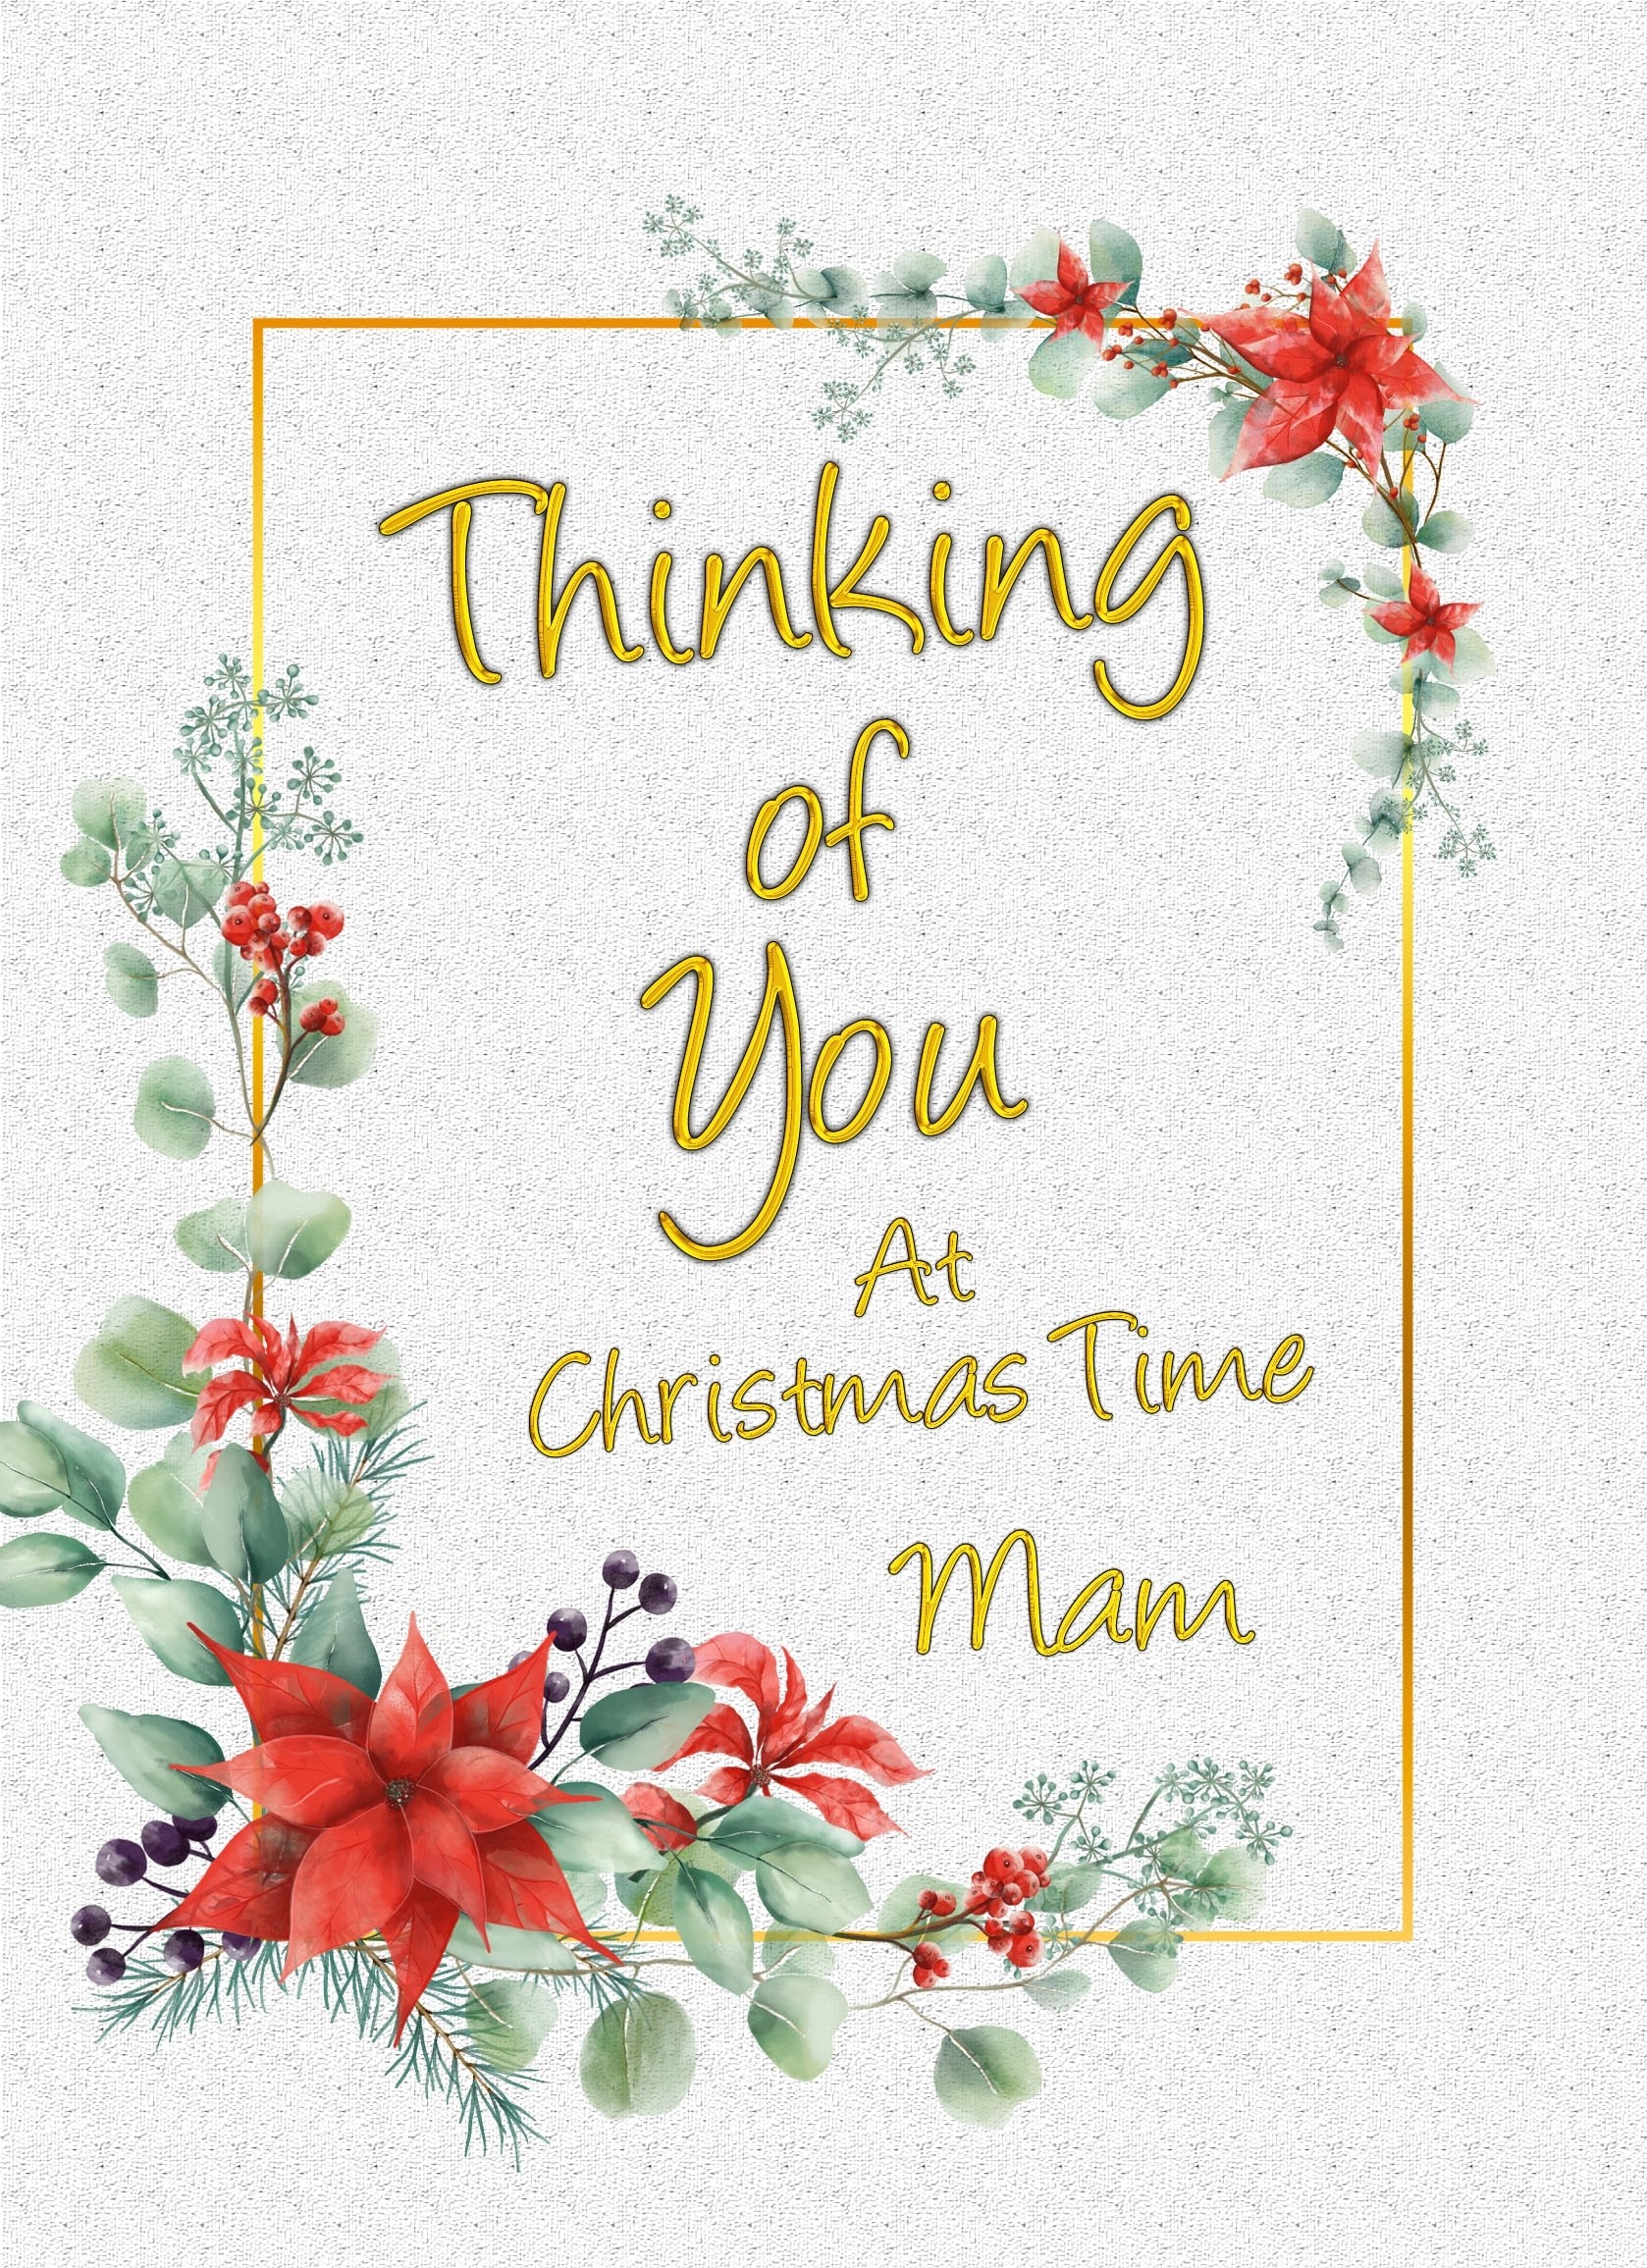 Thinking of You at Christmas Card For Mam